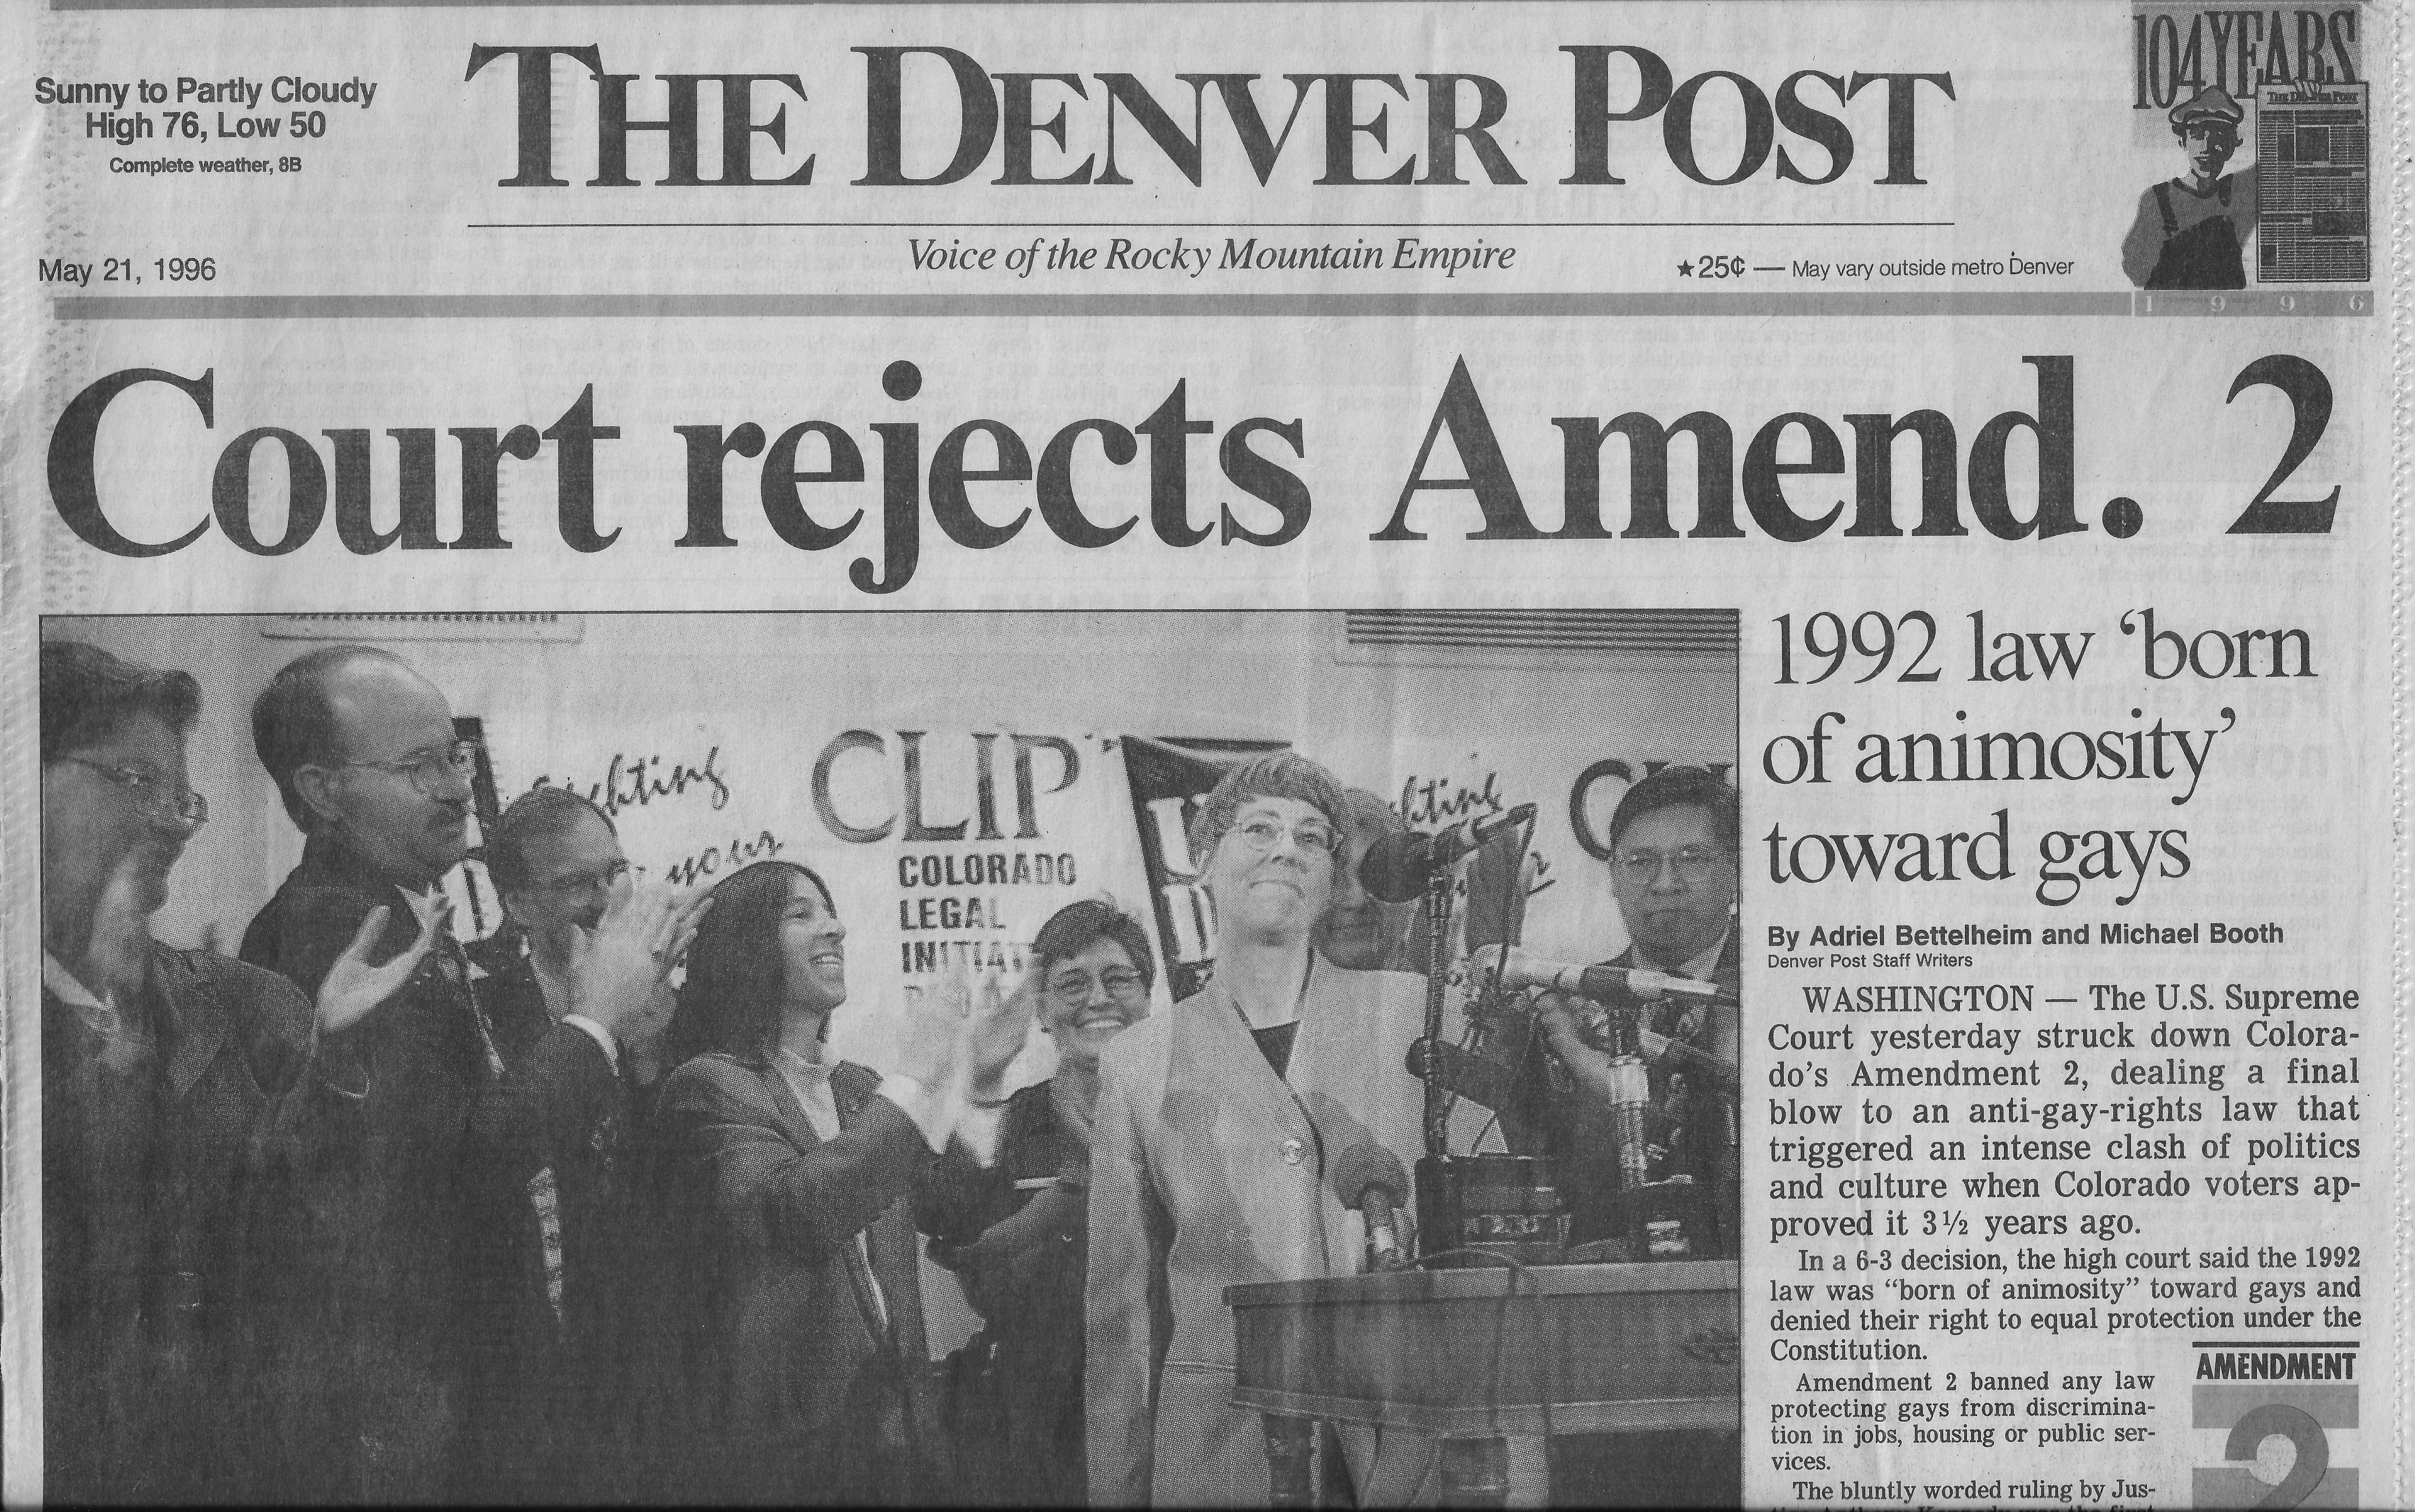 Image of the cover of the The Denver Post, May 21, 1996. The headline in large, bold text reads, "Court rejects Amend. 2" and "1992 law 'born of animosity toward gays.'"